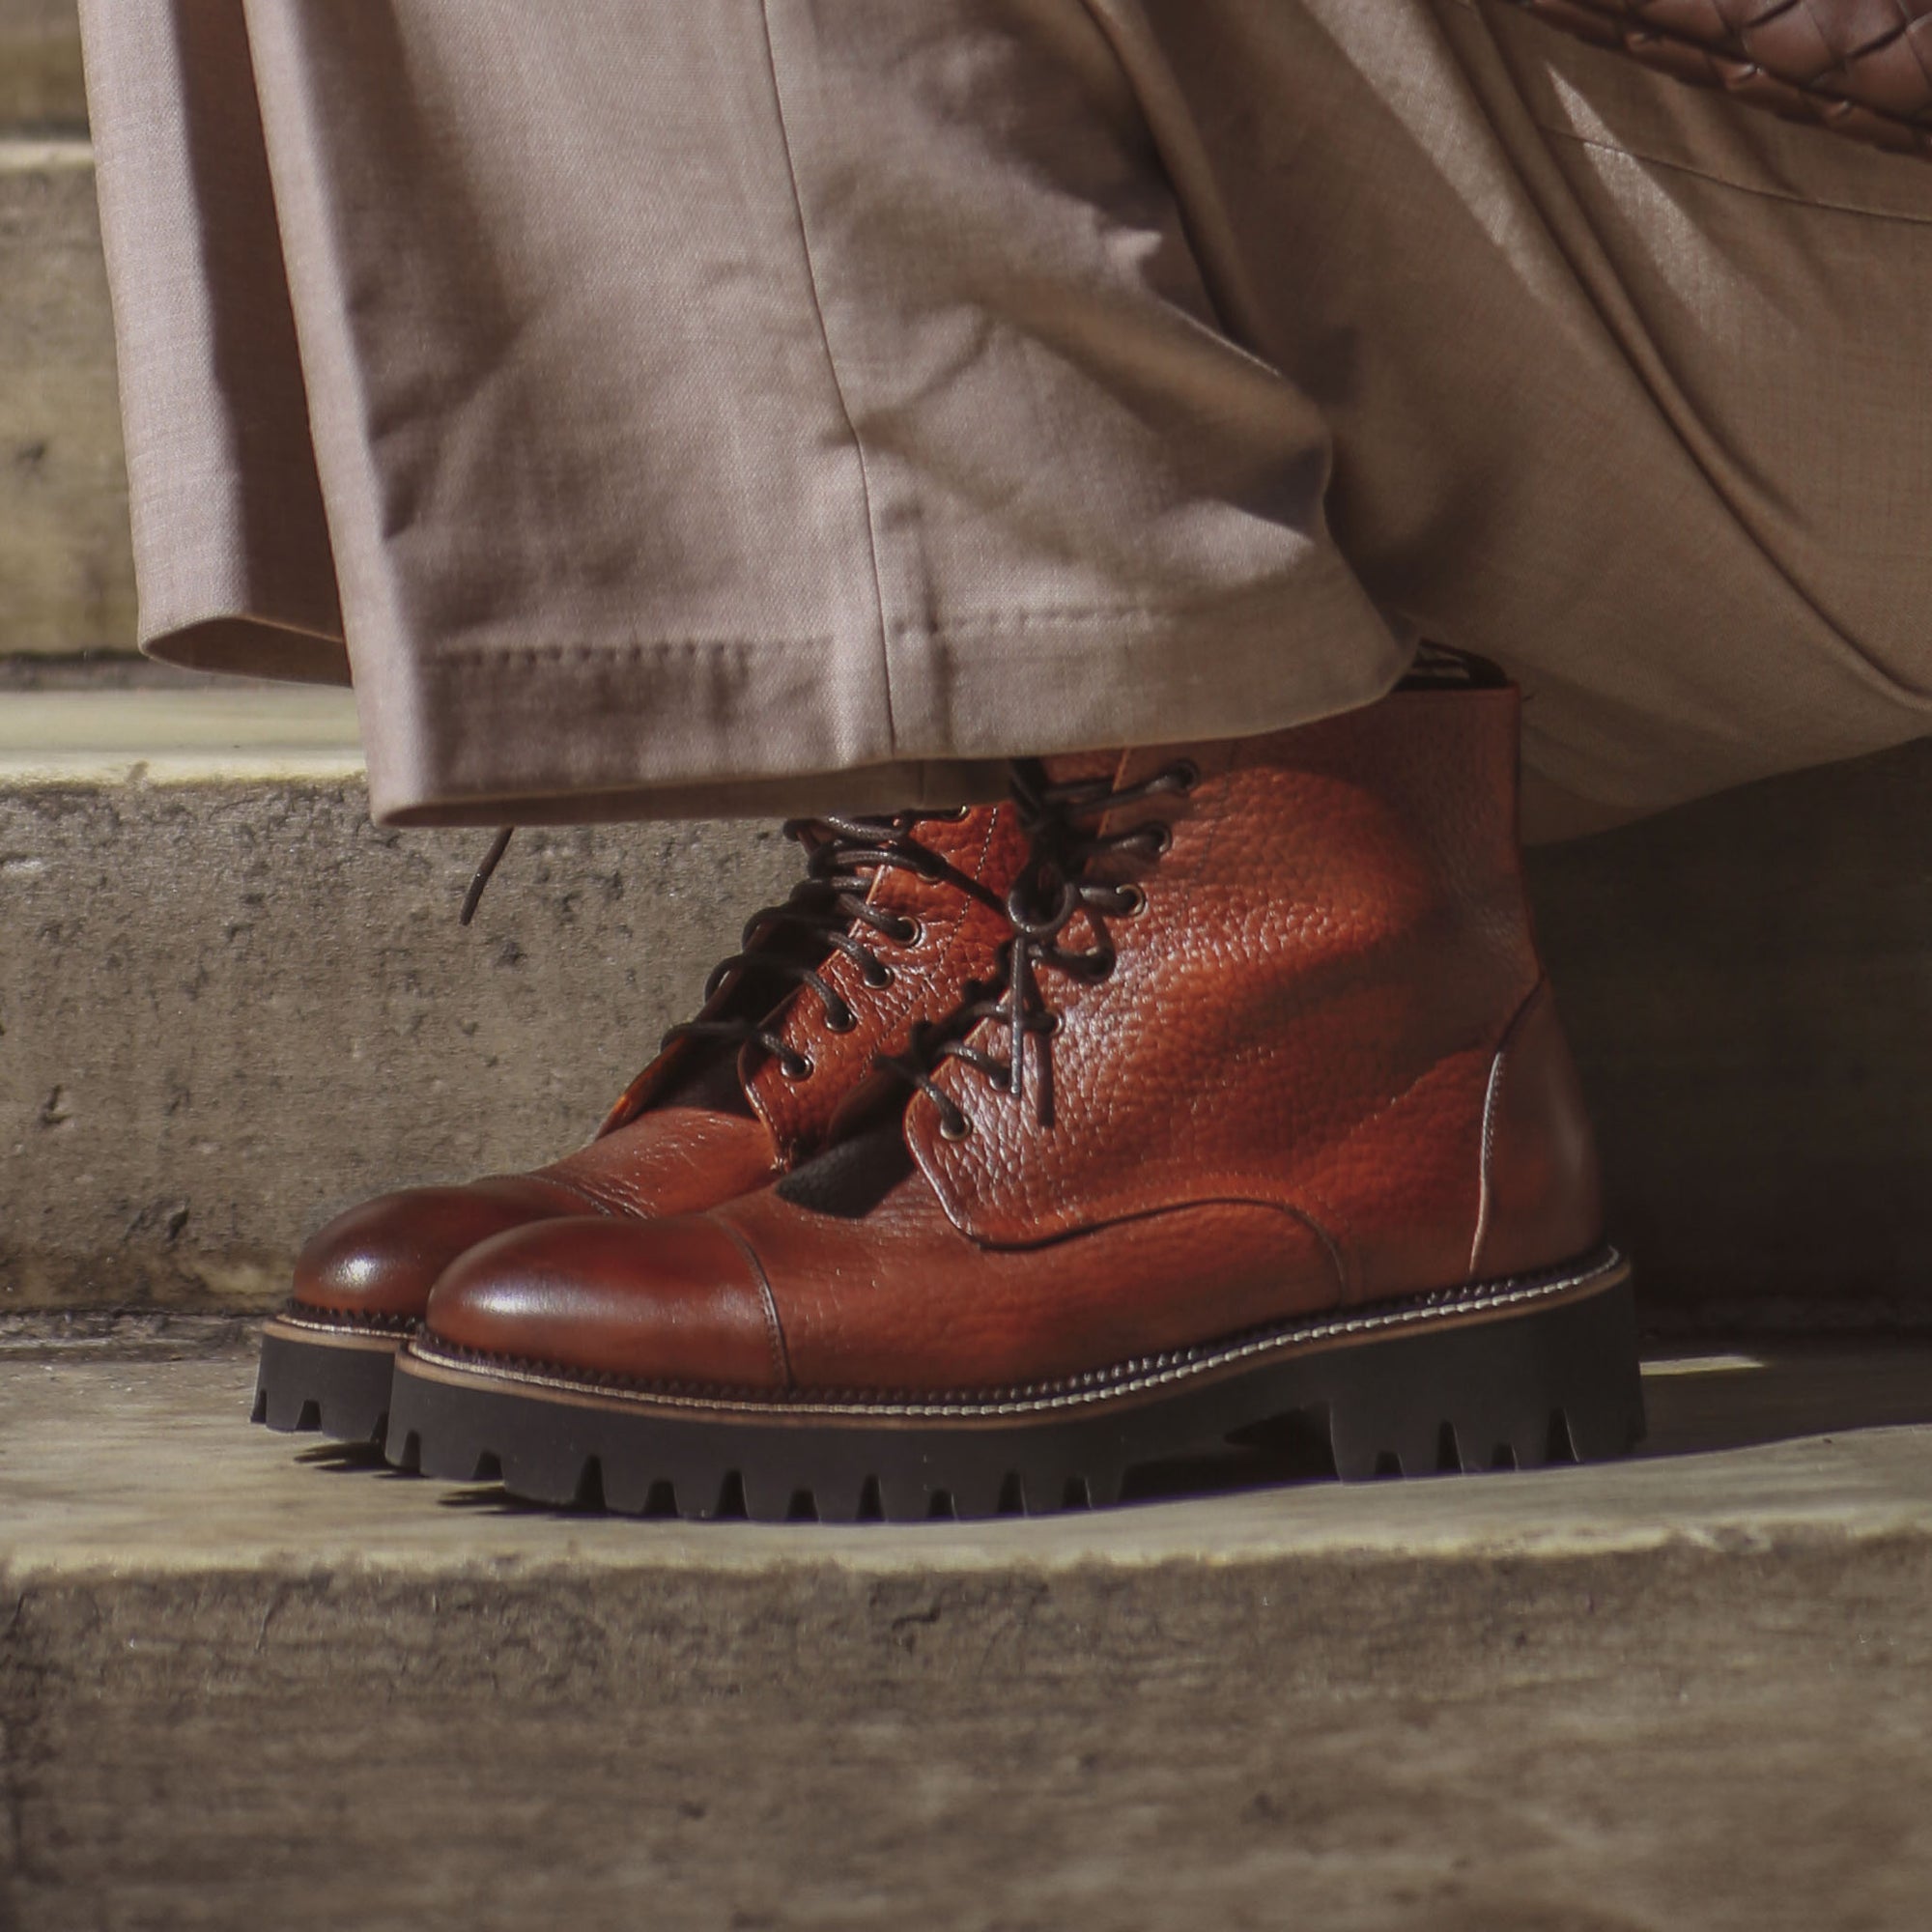 The Roma Boot in Brown